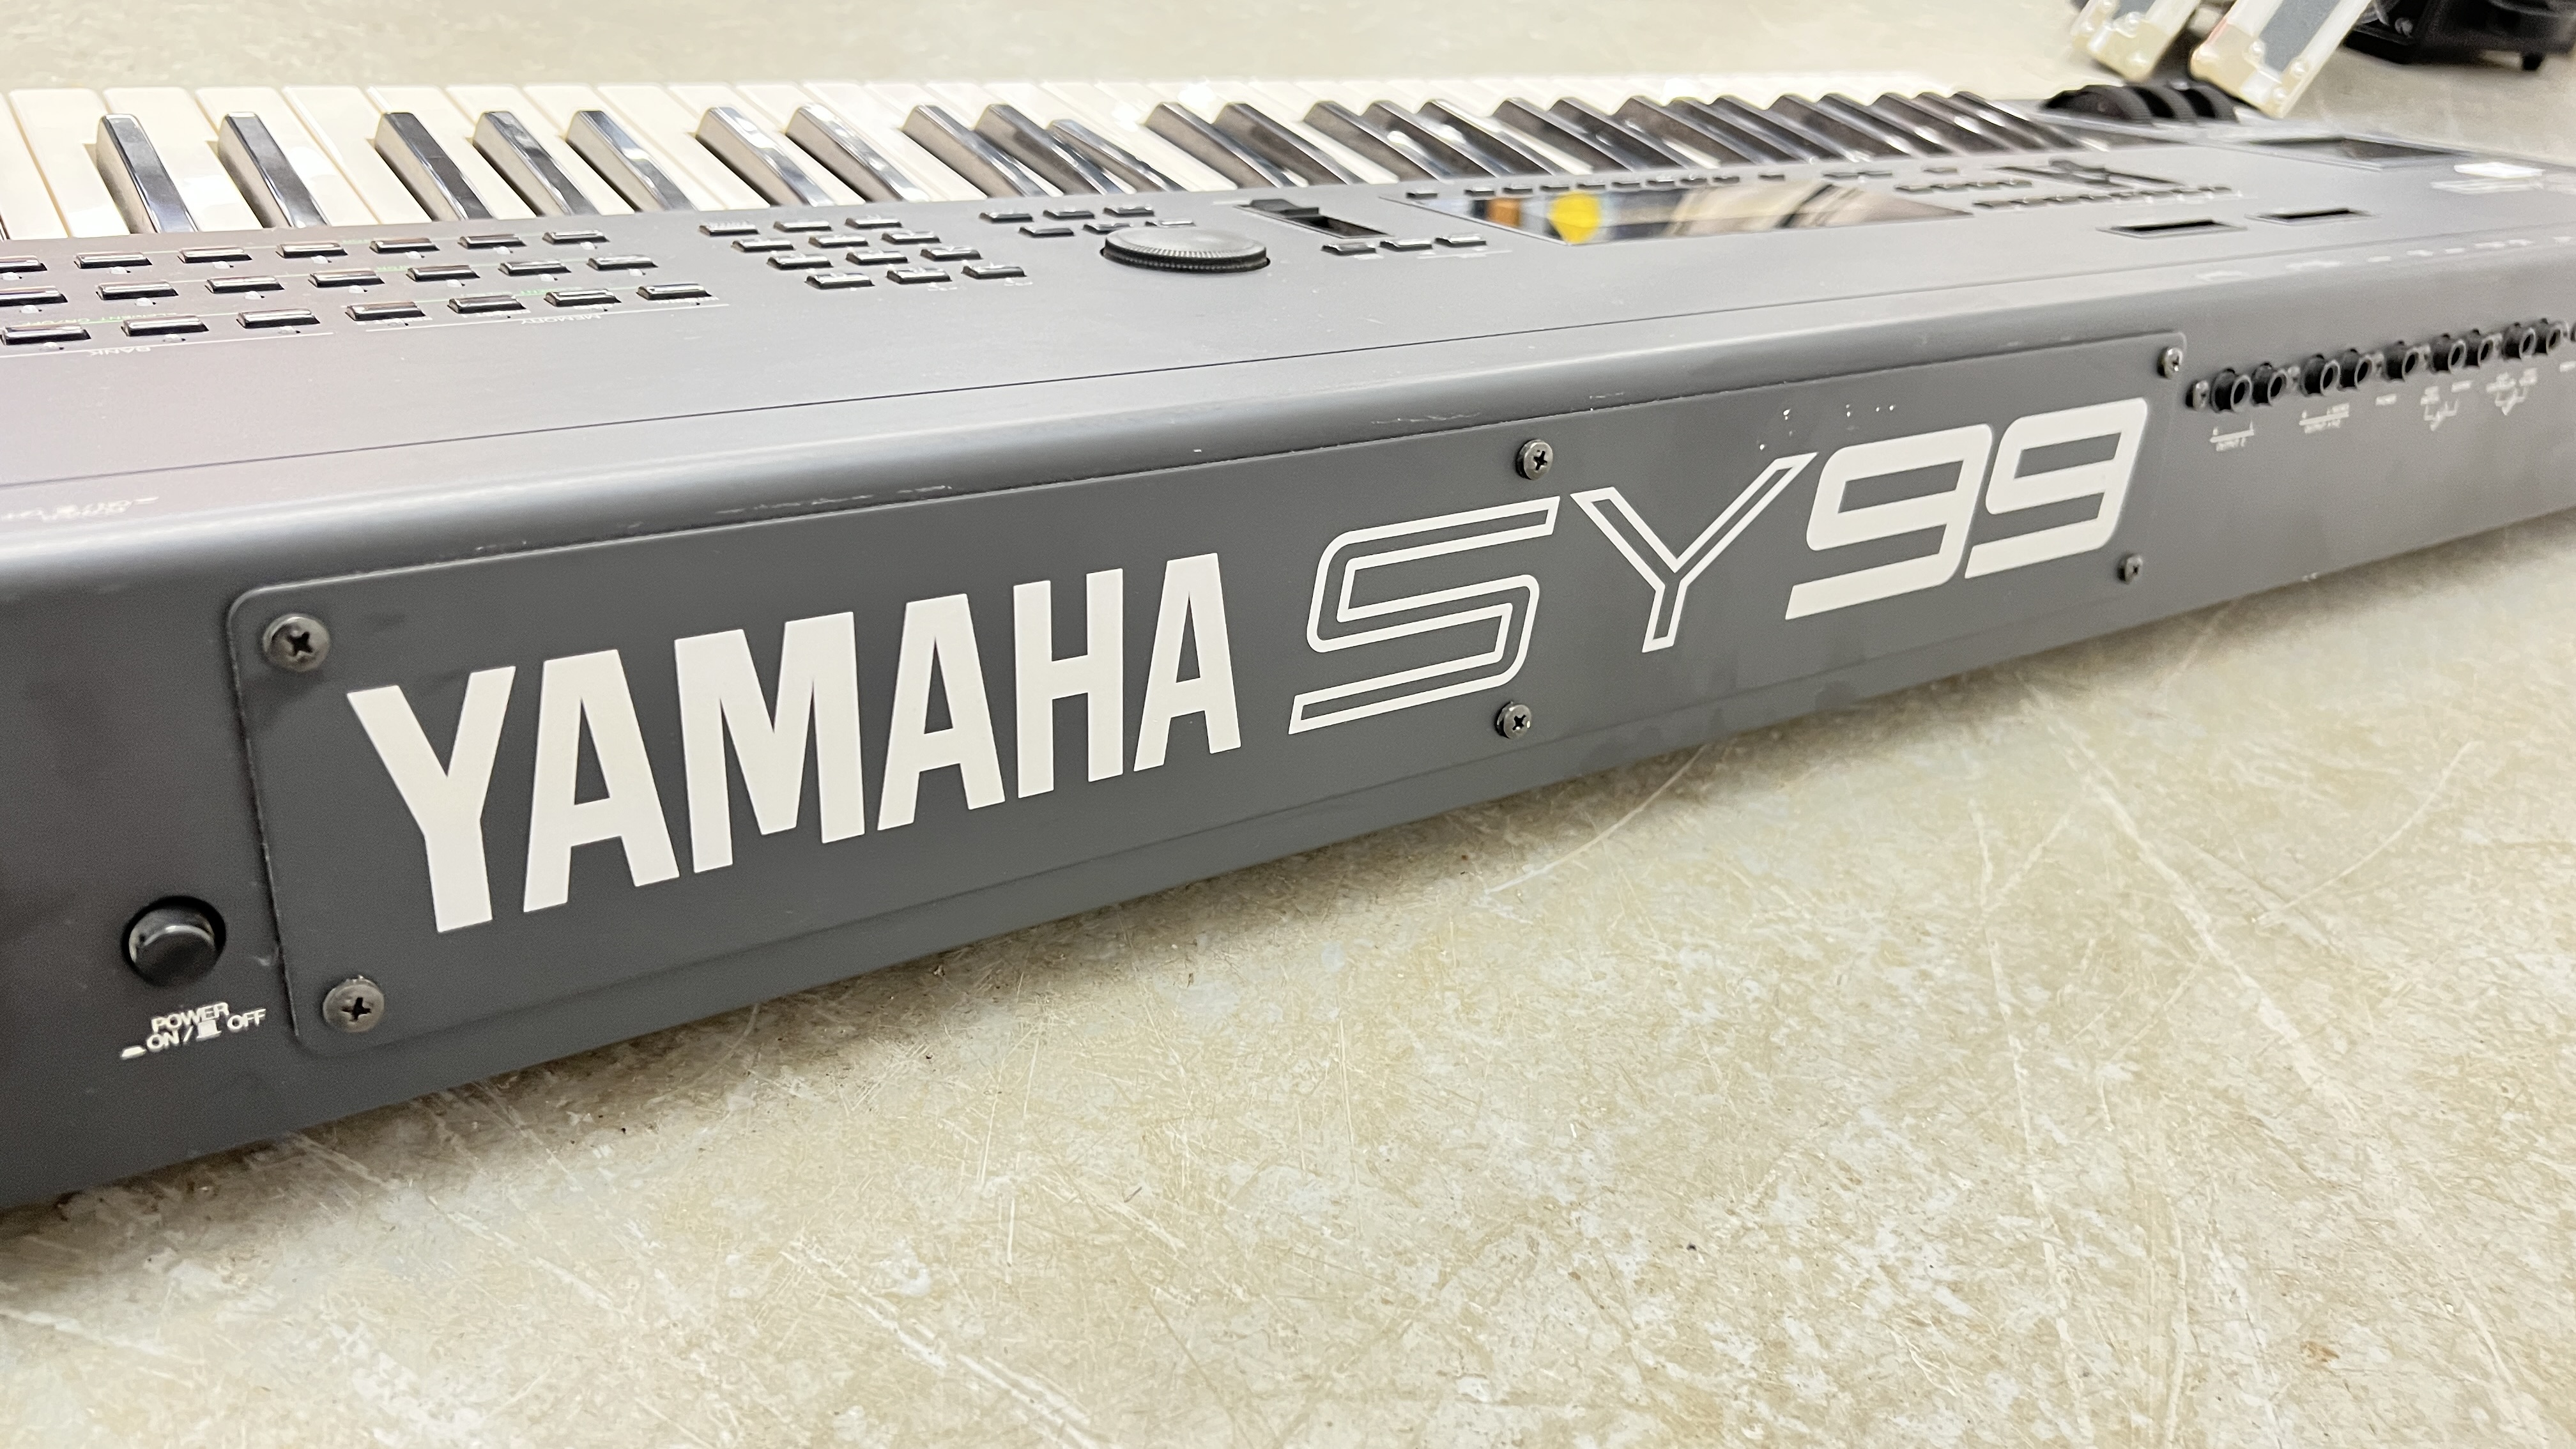 YAMAHA SY99 MUSIC SYNTHESIZER - SOLD AS SEEN - AS CLEARED. - Image 5 of 6